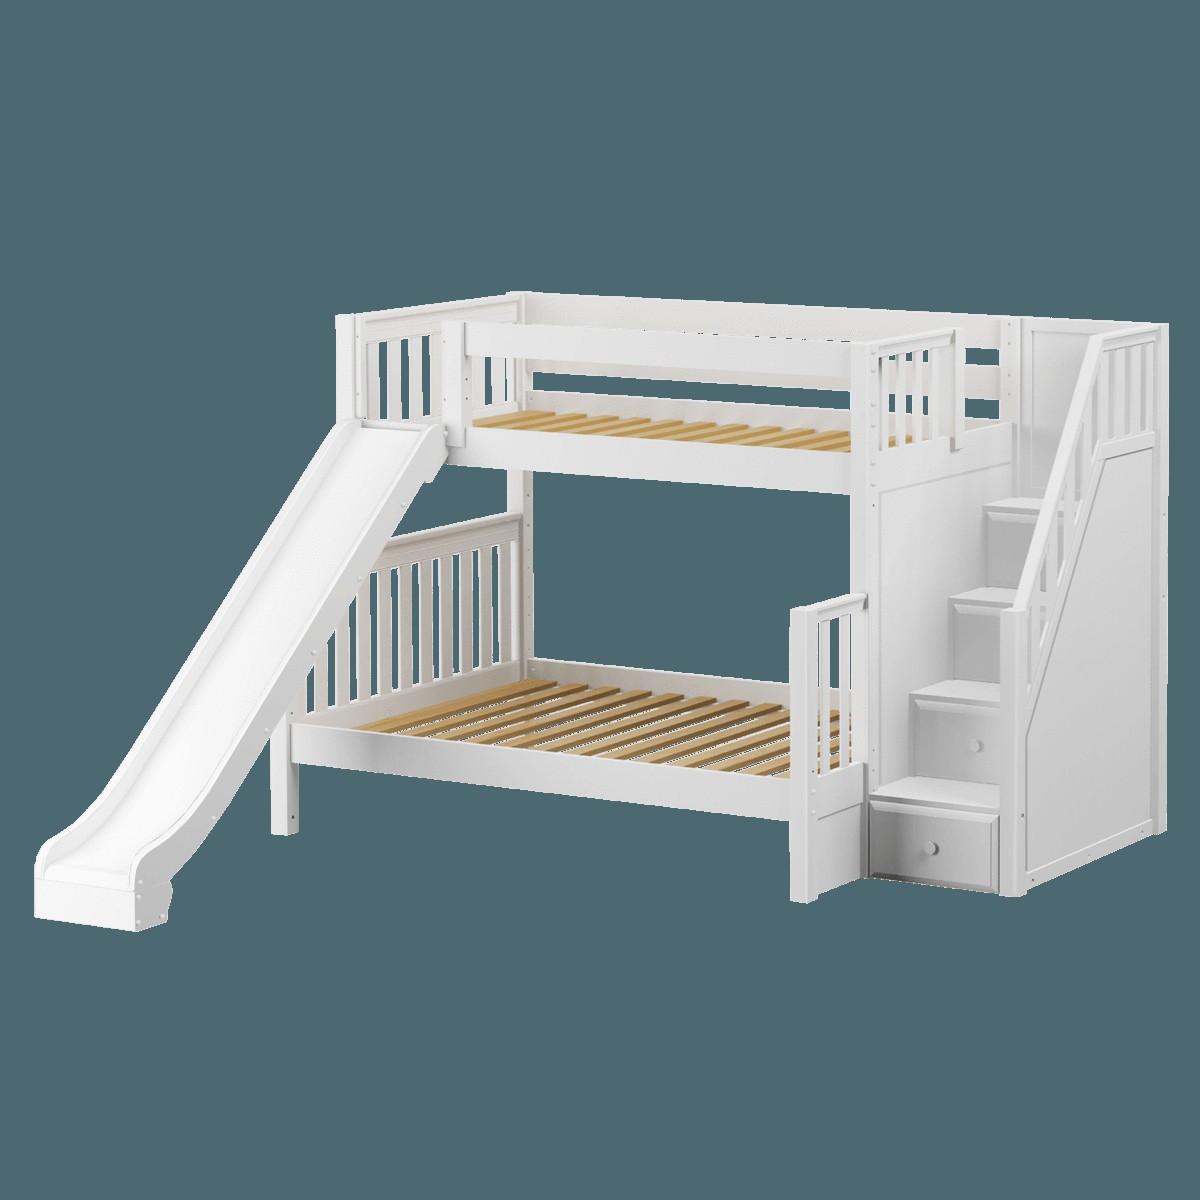 Medium twin over full bunk bed with stairs slide in